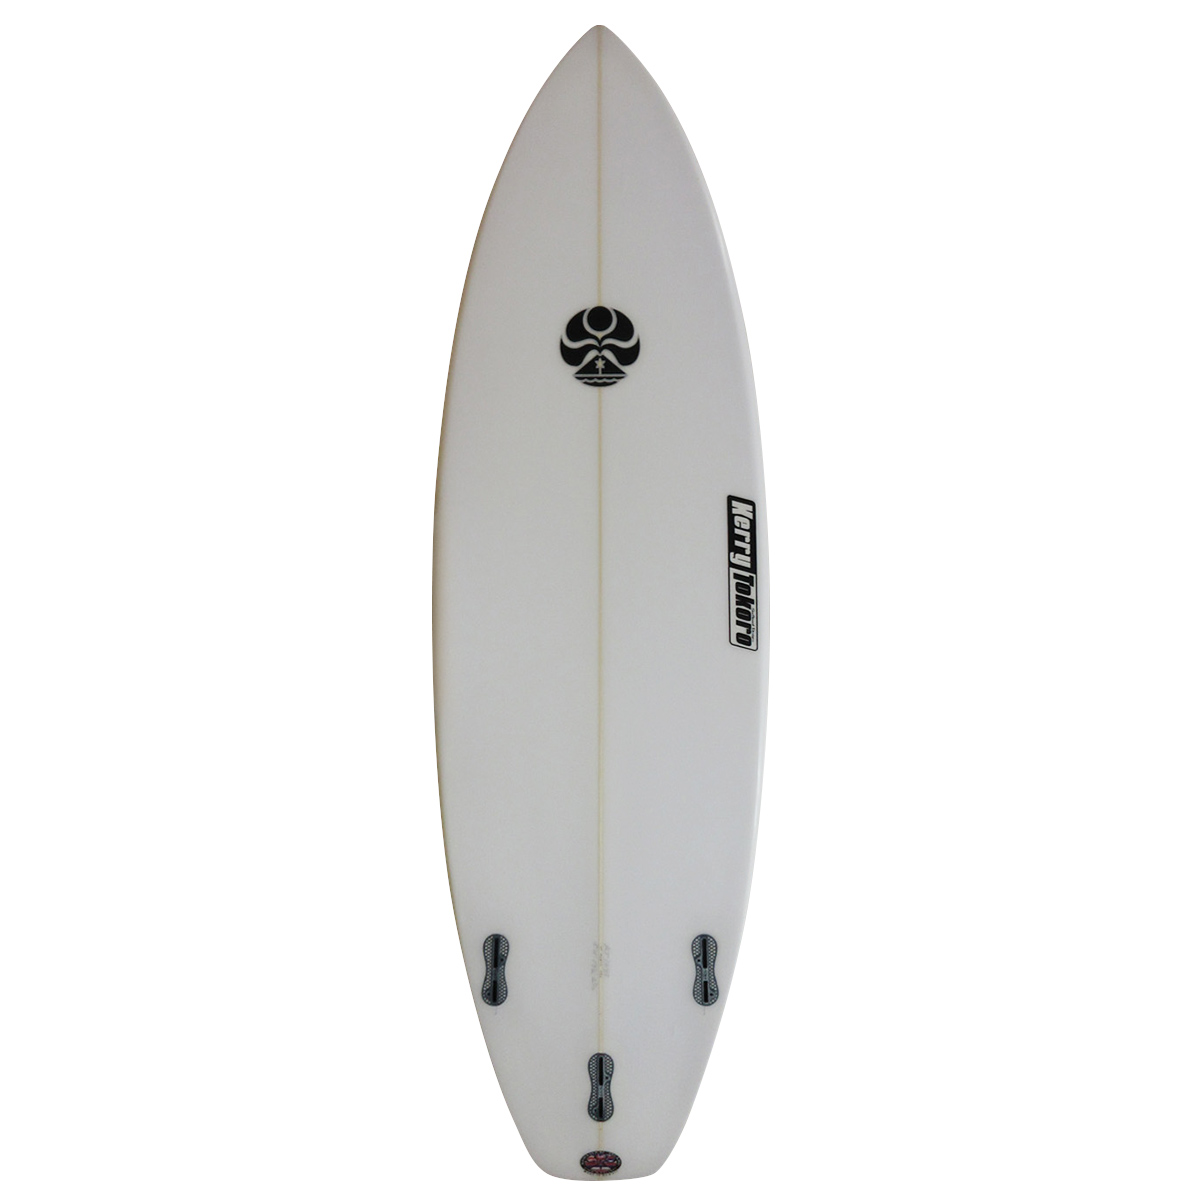 HIC / Vortex 5'11 Shaped by Kerry Tokoro